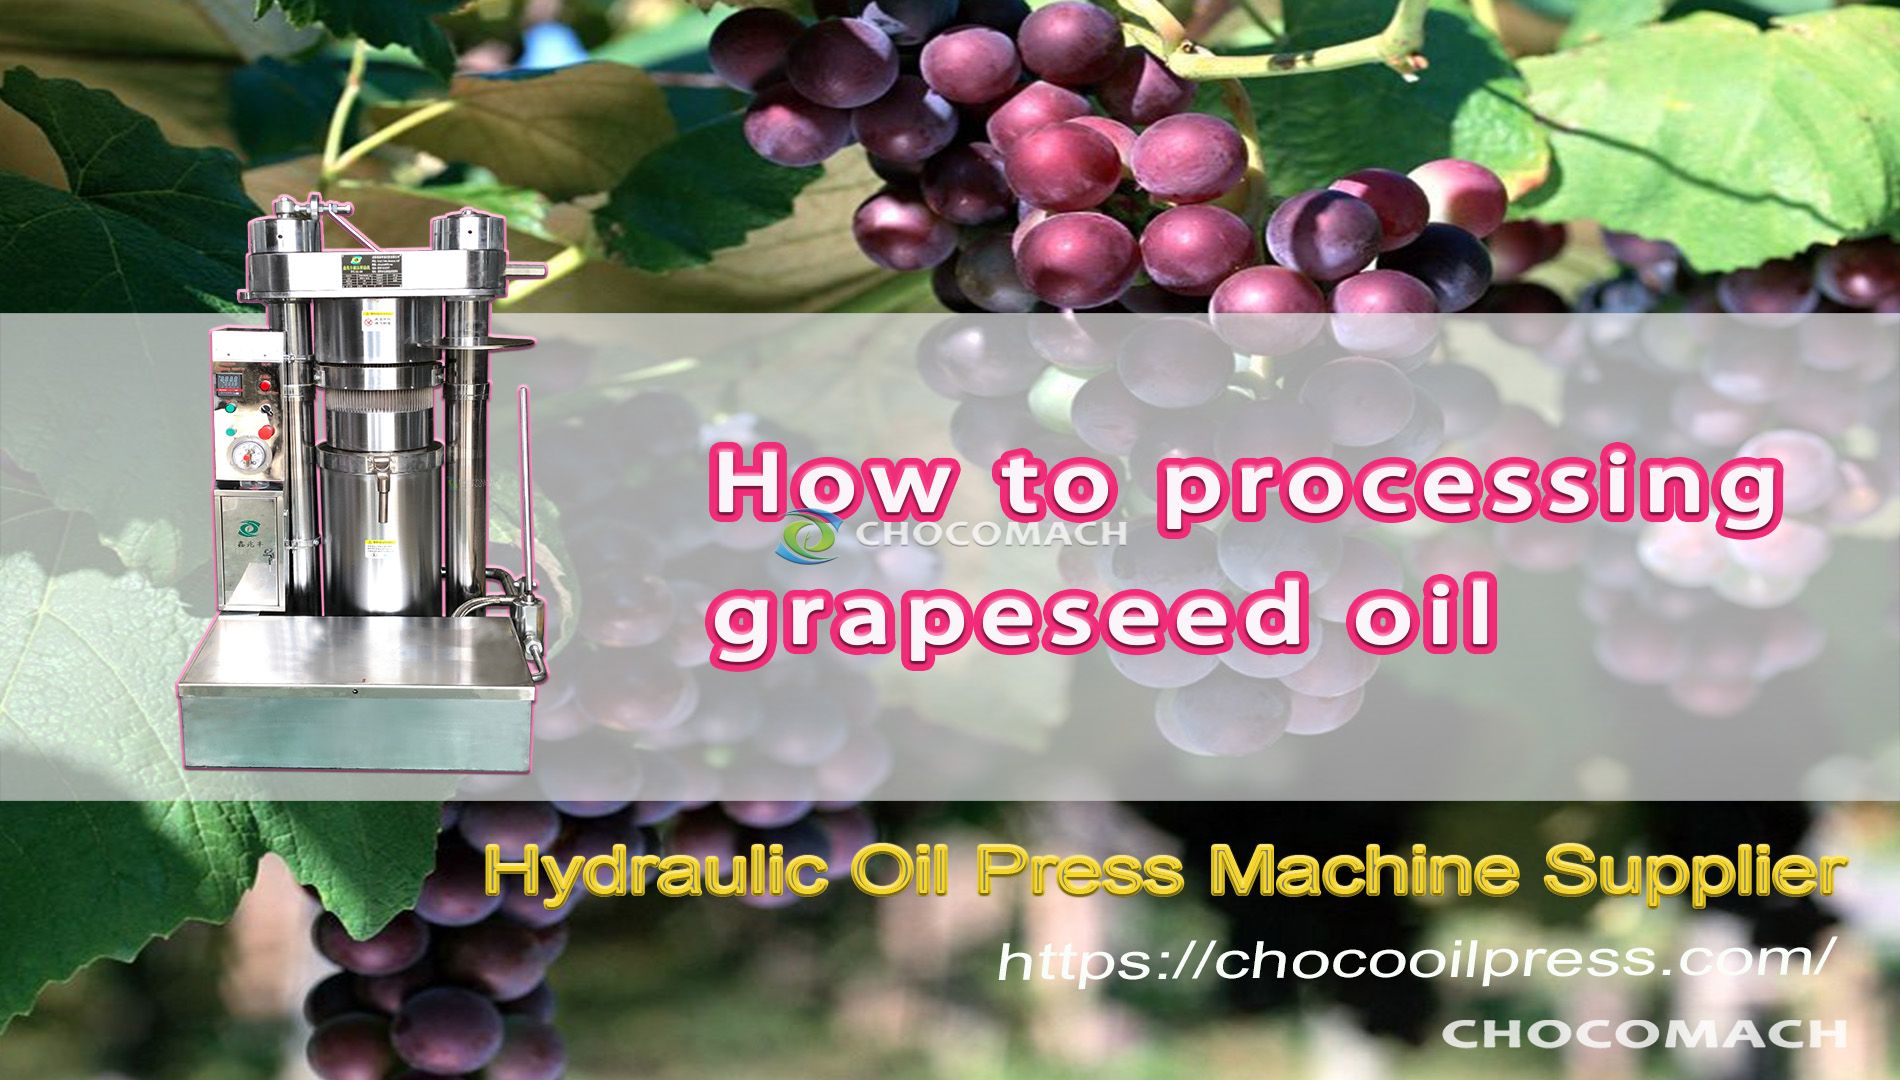 How to extract grapeseed oil? CHOCOMACH YZL oil processing machine